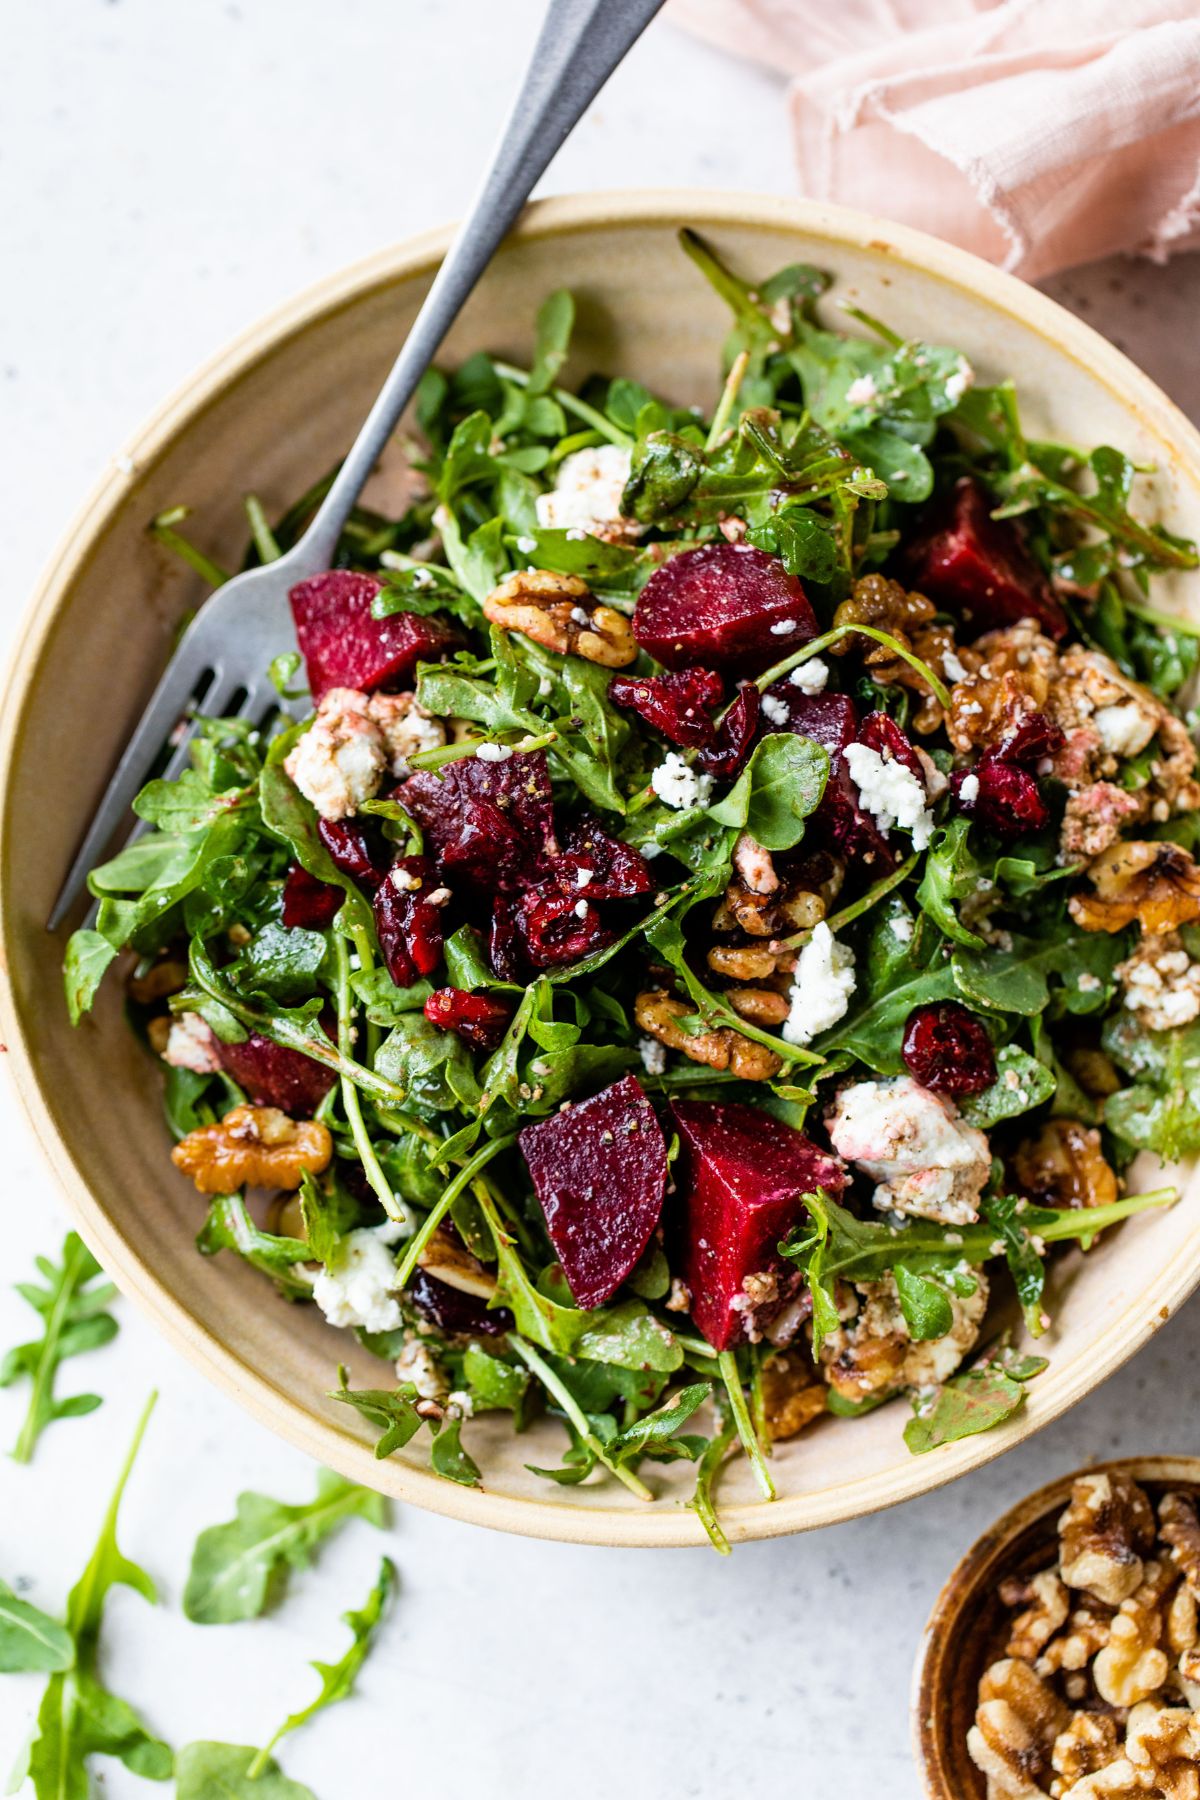 Beets tossed with arugula, walnuts and goat cheese.